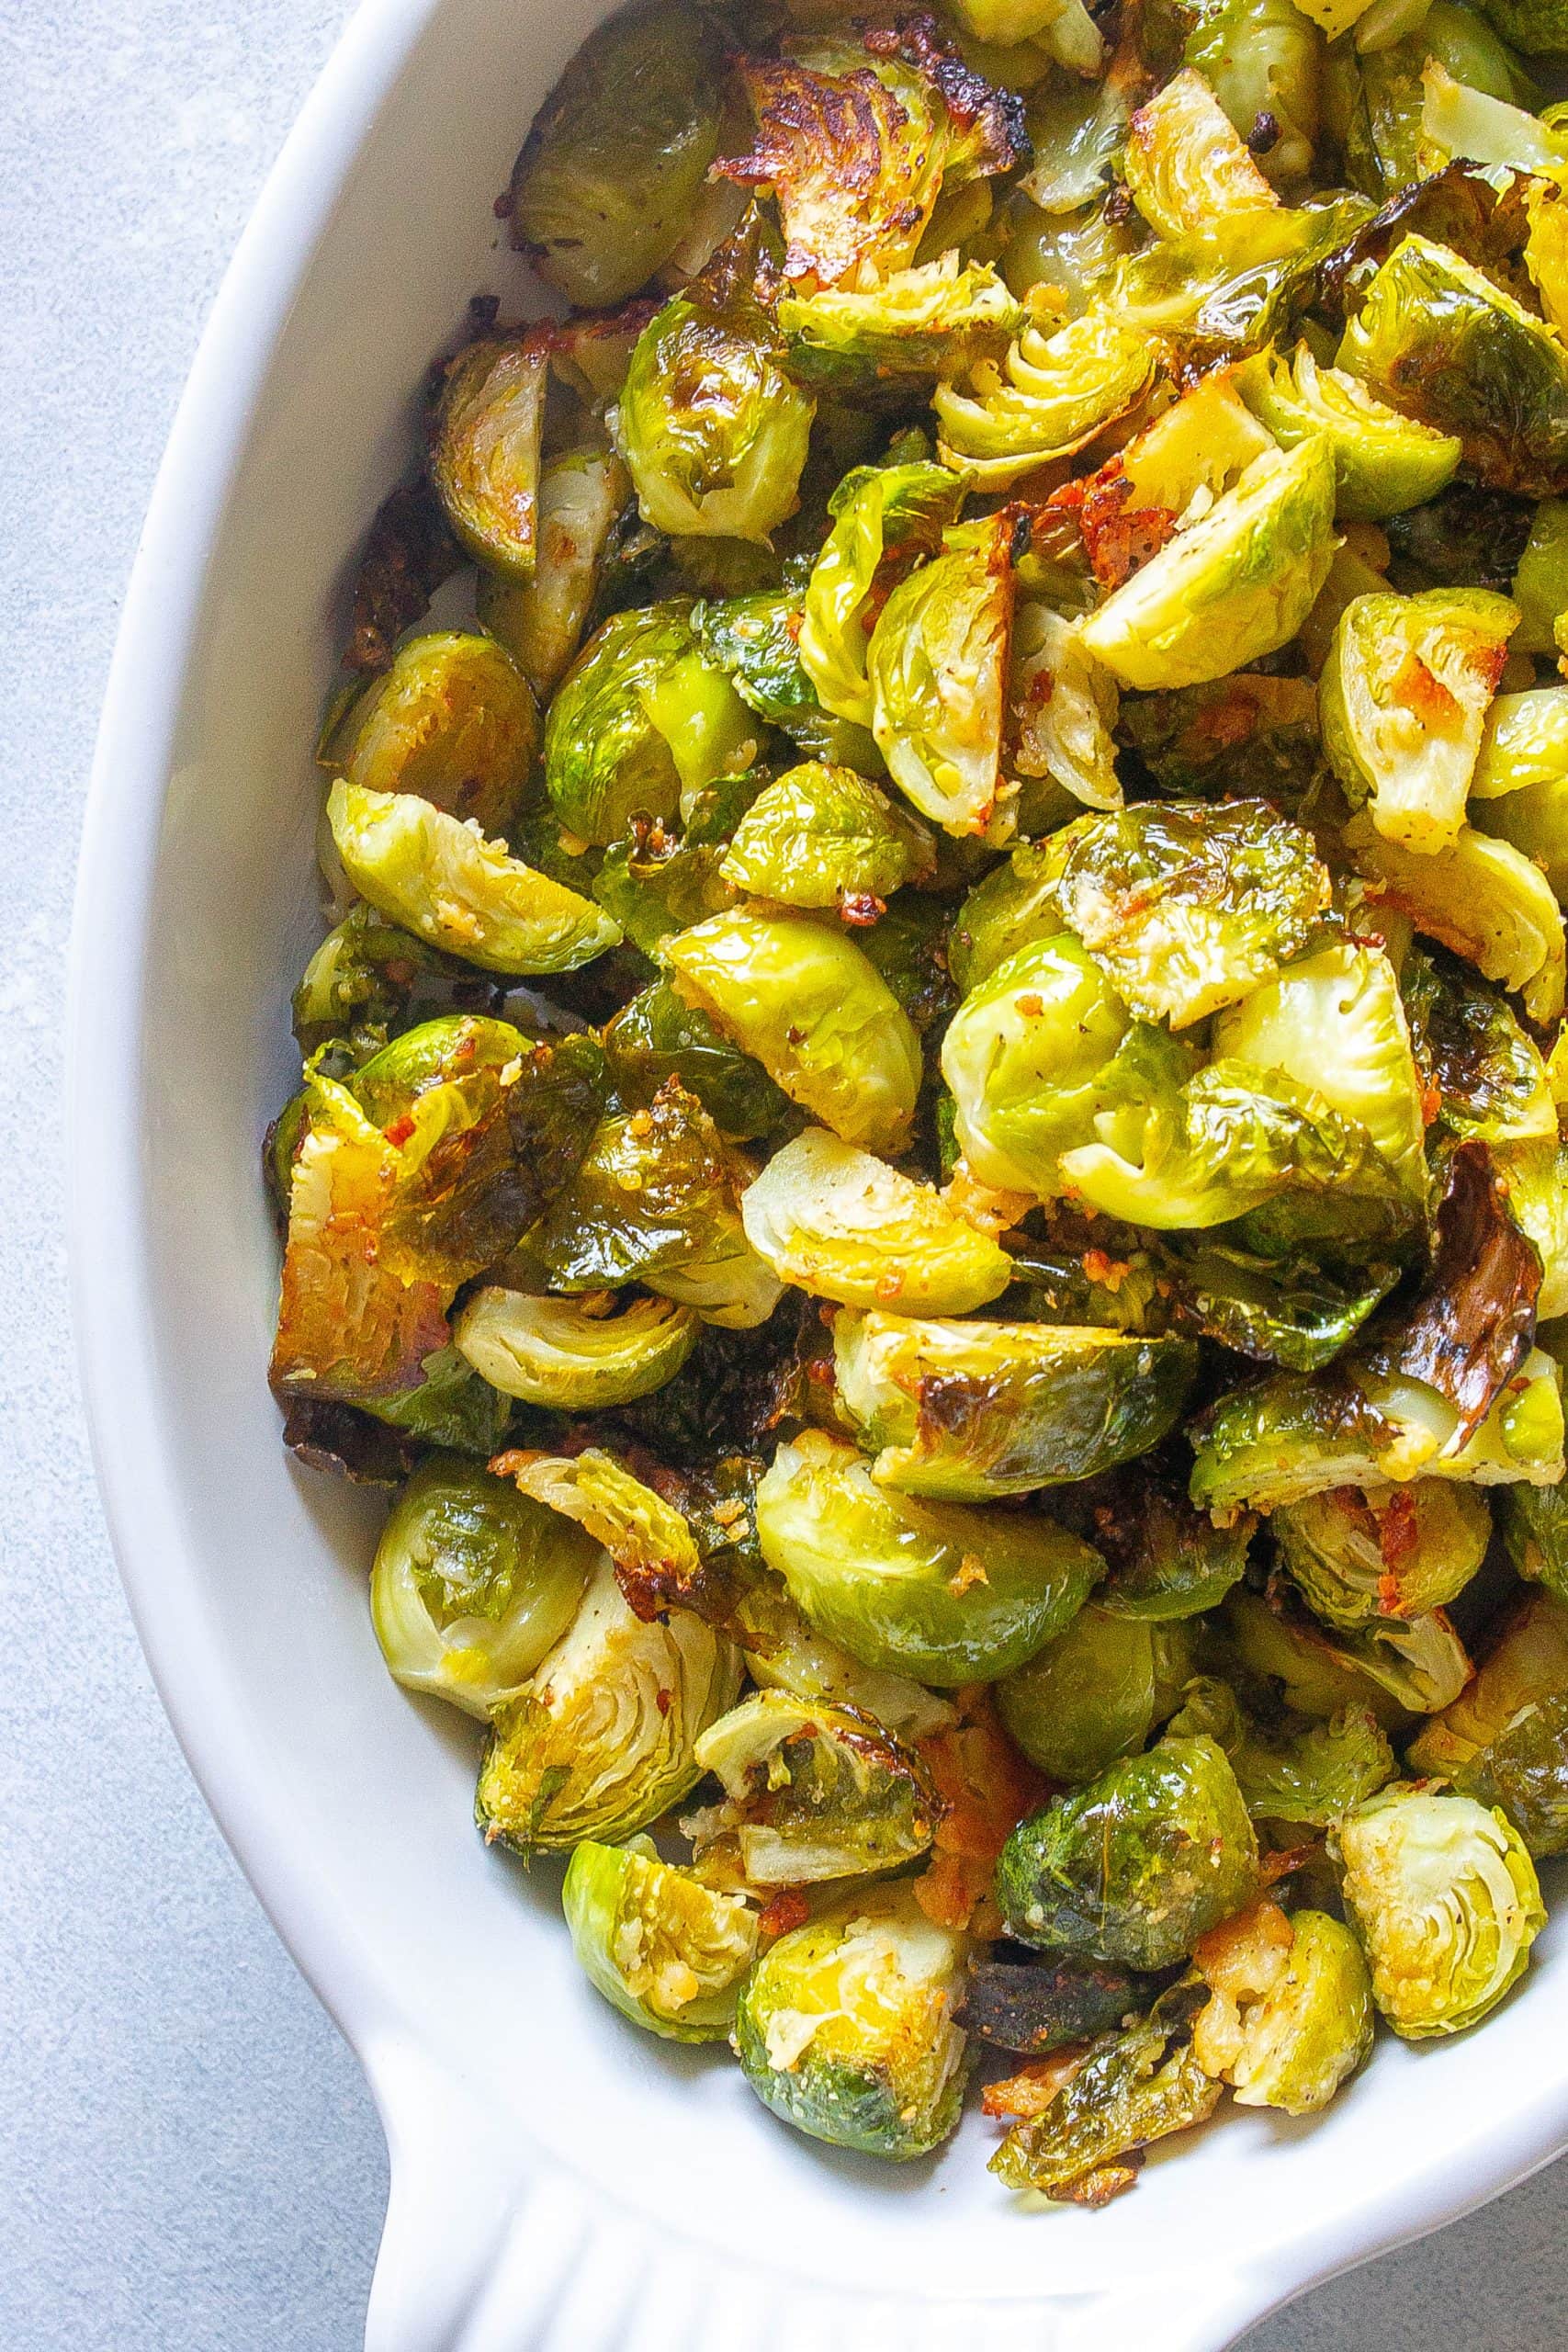 Roasted Garlic Parmesan Brussel Sprouts